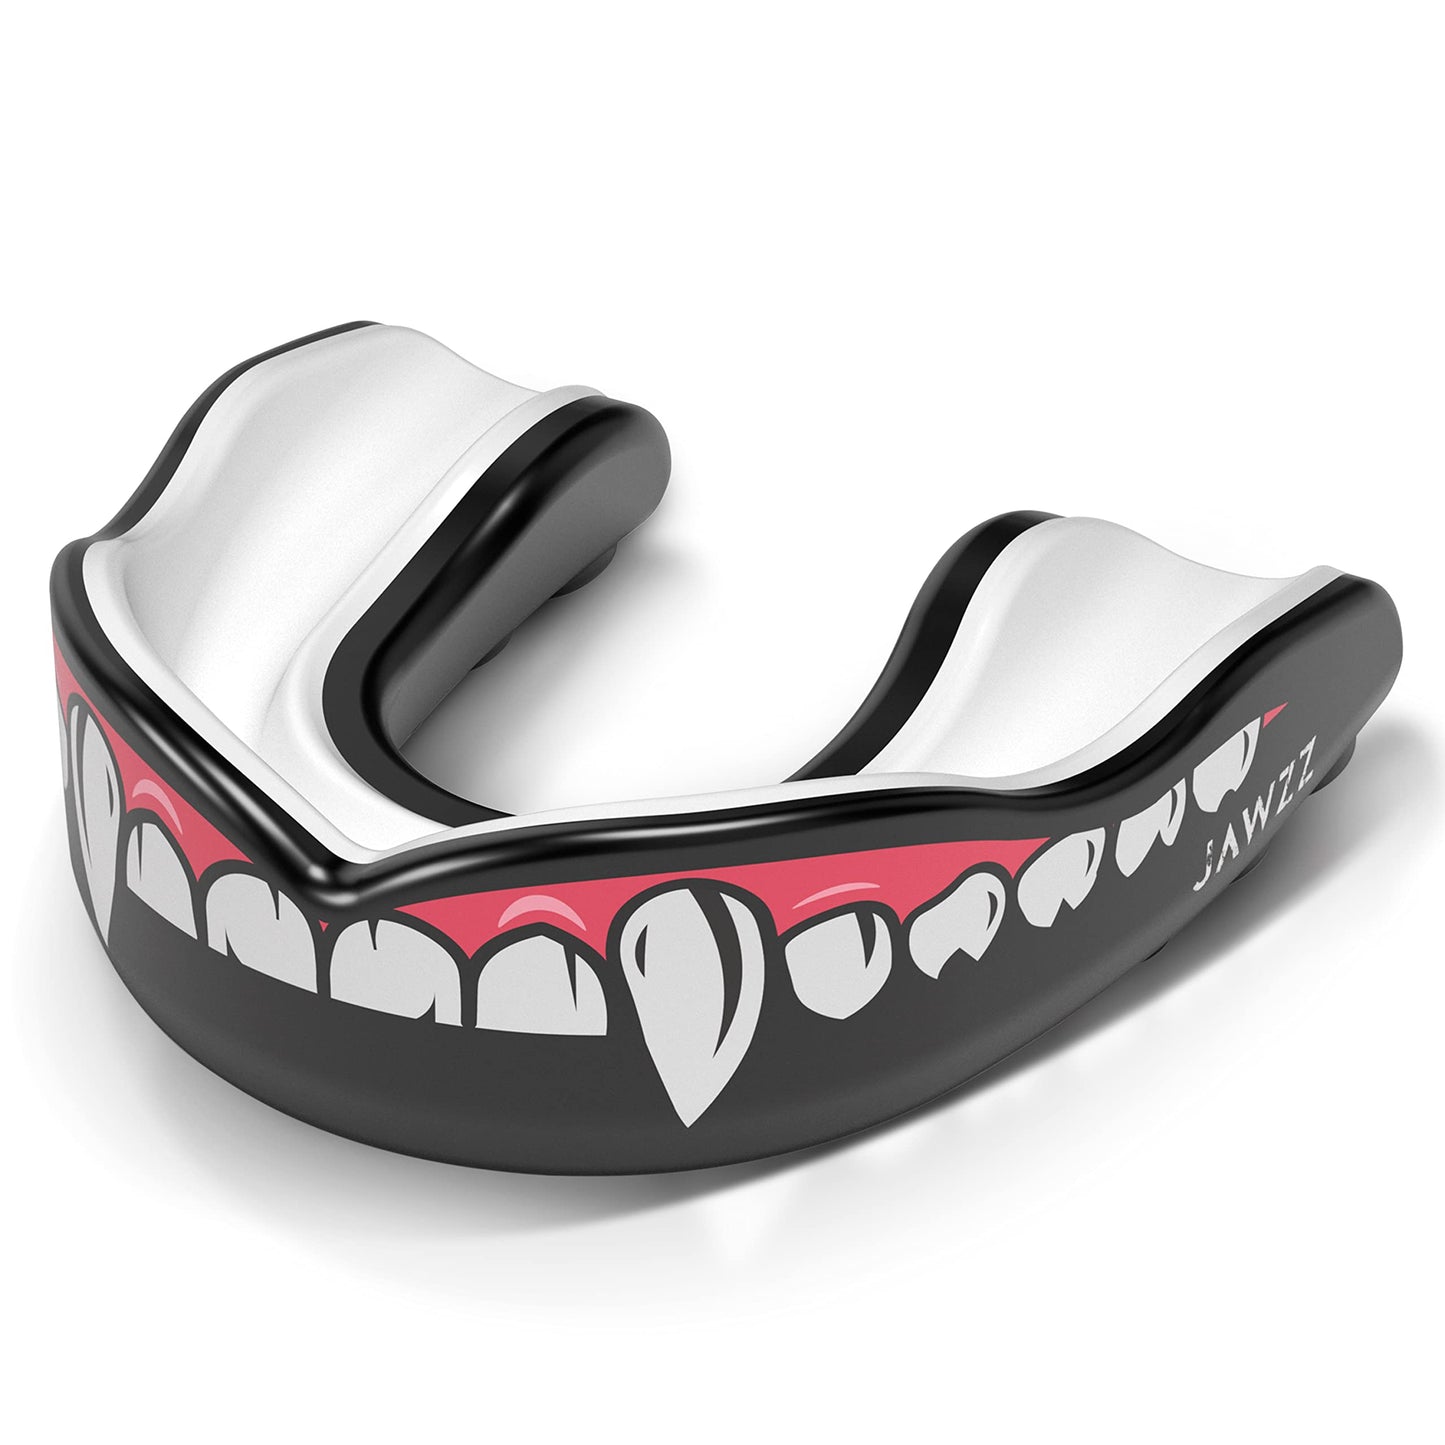 Adult Mouth Guard Sports – Boil and Bite Football Mouth Guard for Ages 12+ & Mouth Guard Case – Adult Mouthguard for Football, Boxing, Lacrosse, Hockey, Rugby & MMA by Jawzz Mouthguards | White